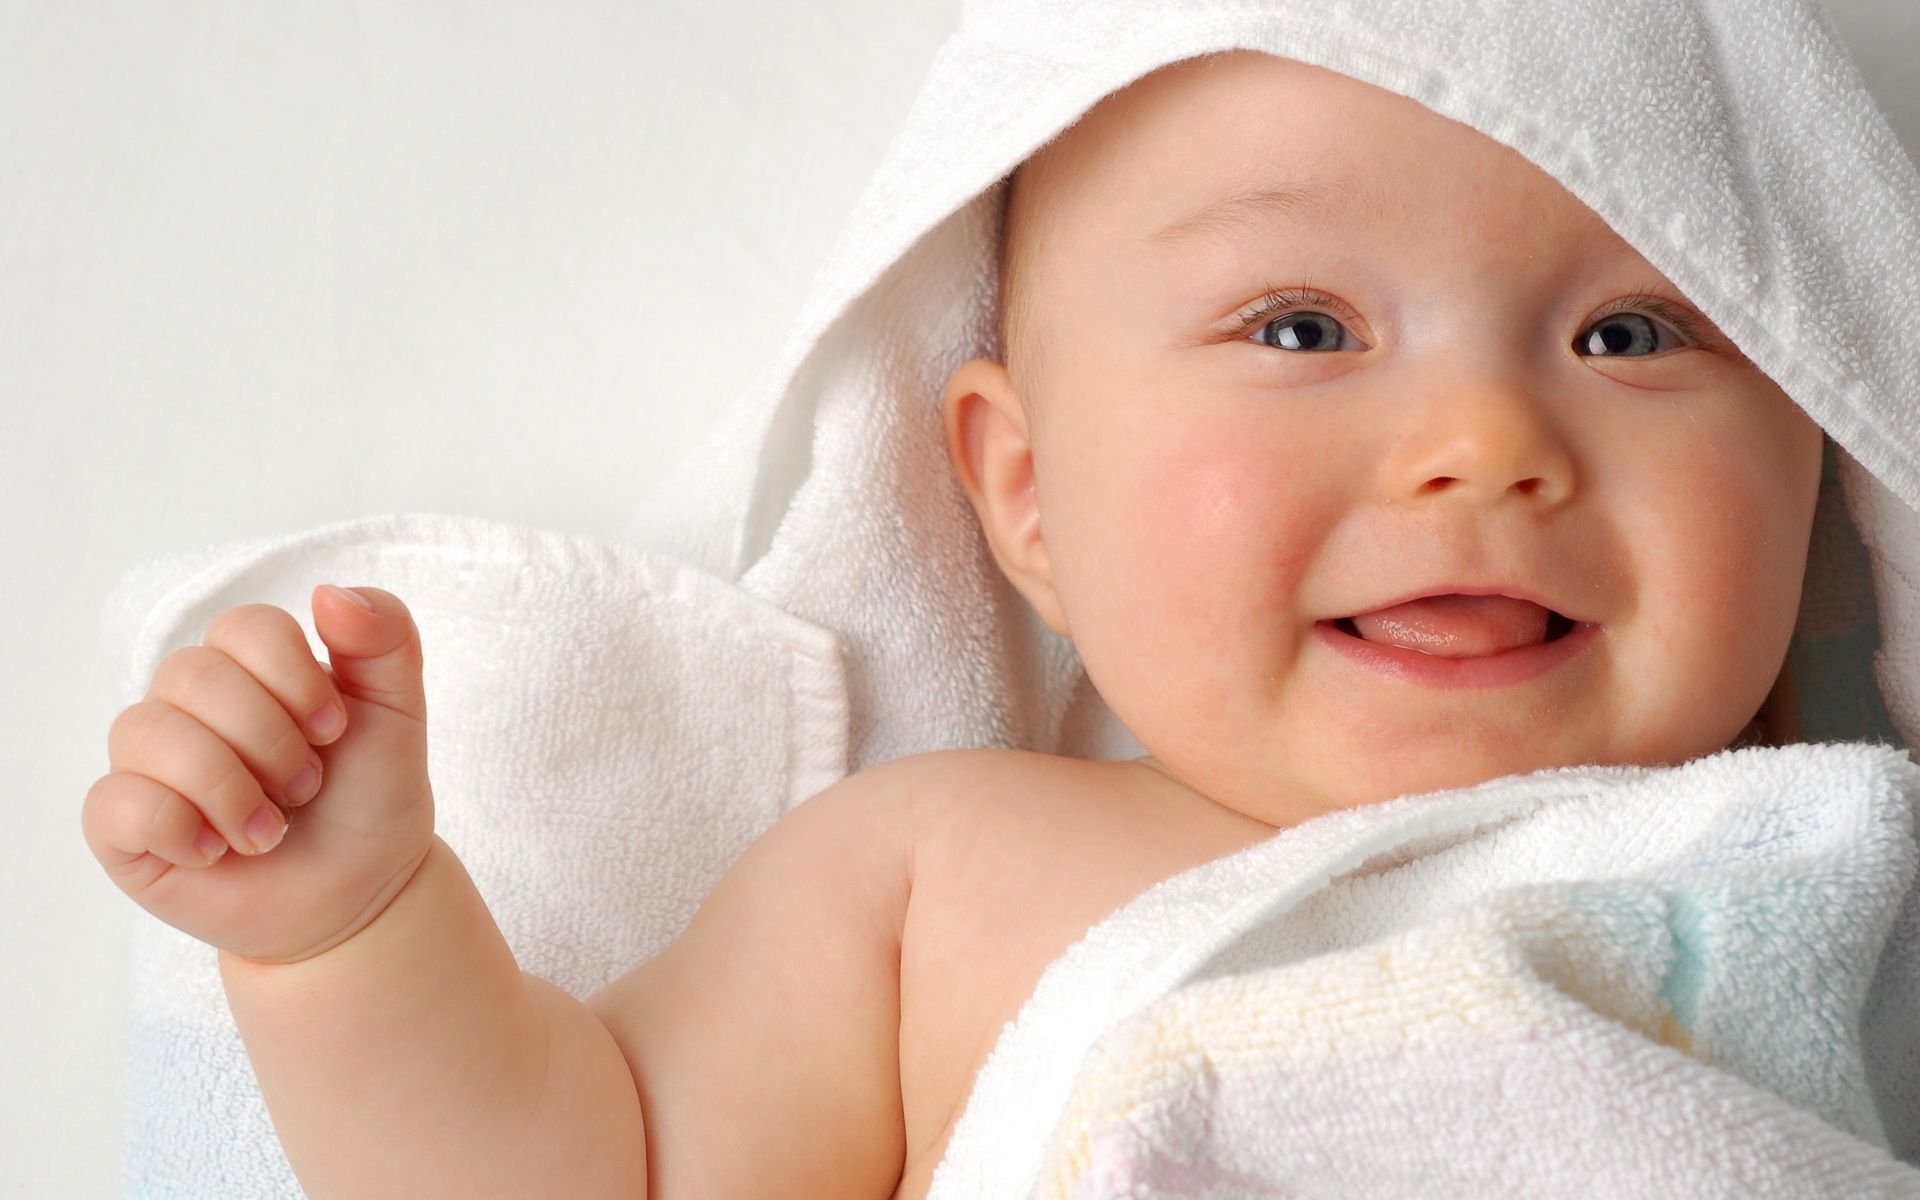 Cute Baby Wallpaper Free Download 6776 - HD Wallpapers Site